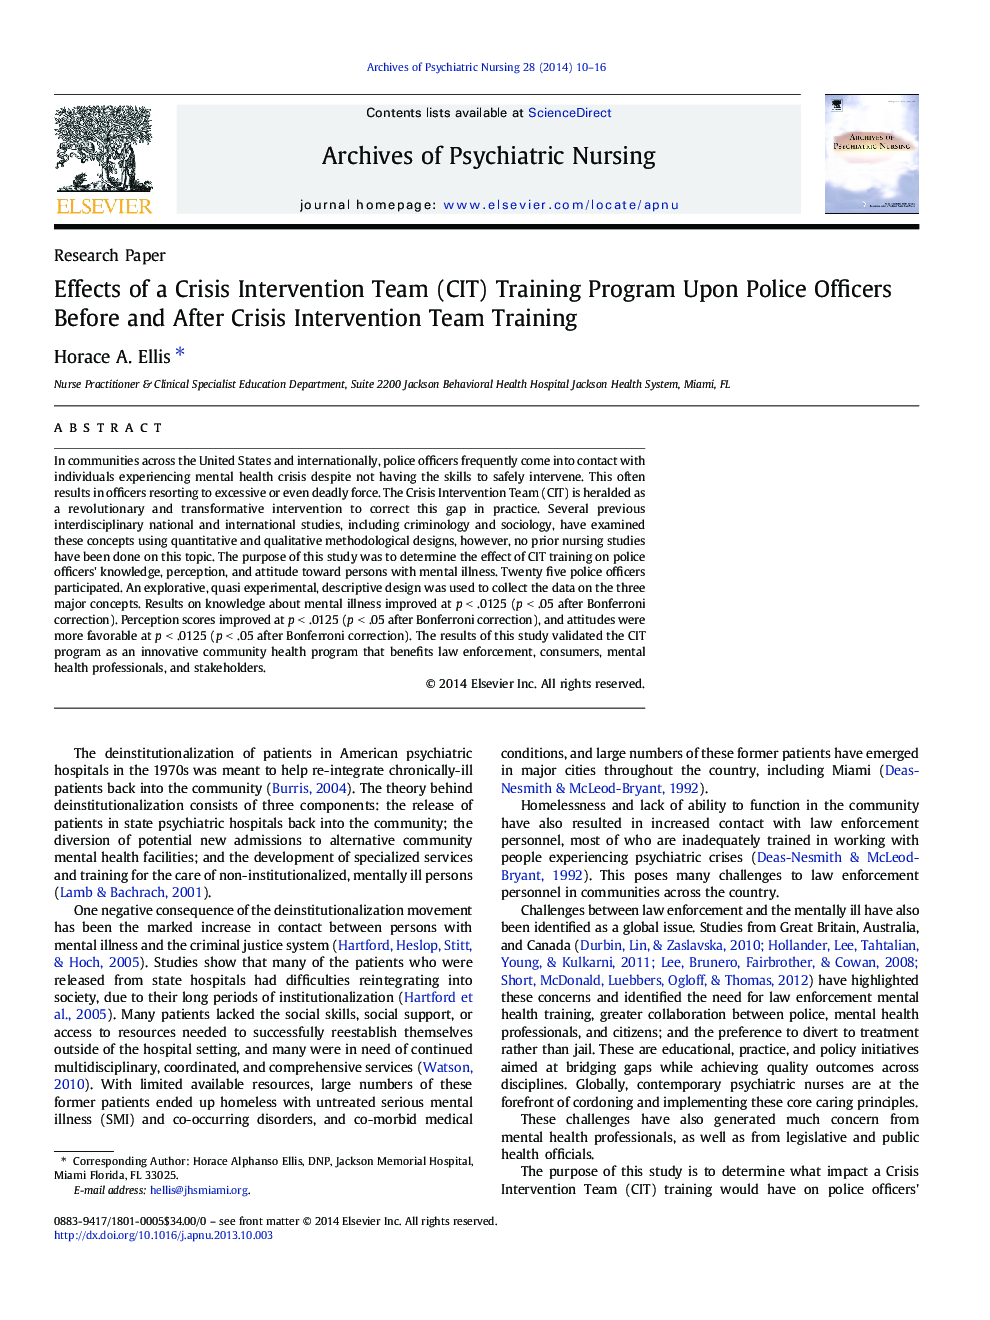 Effects of a Crisis Intervention Team (CIT) Training Program Upon Police Officers Before and After Crisis Intervention Team Training